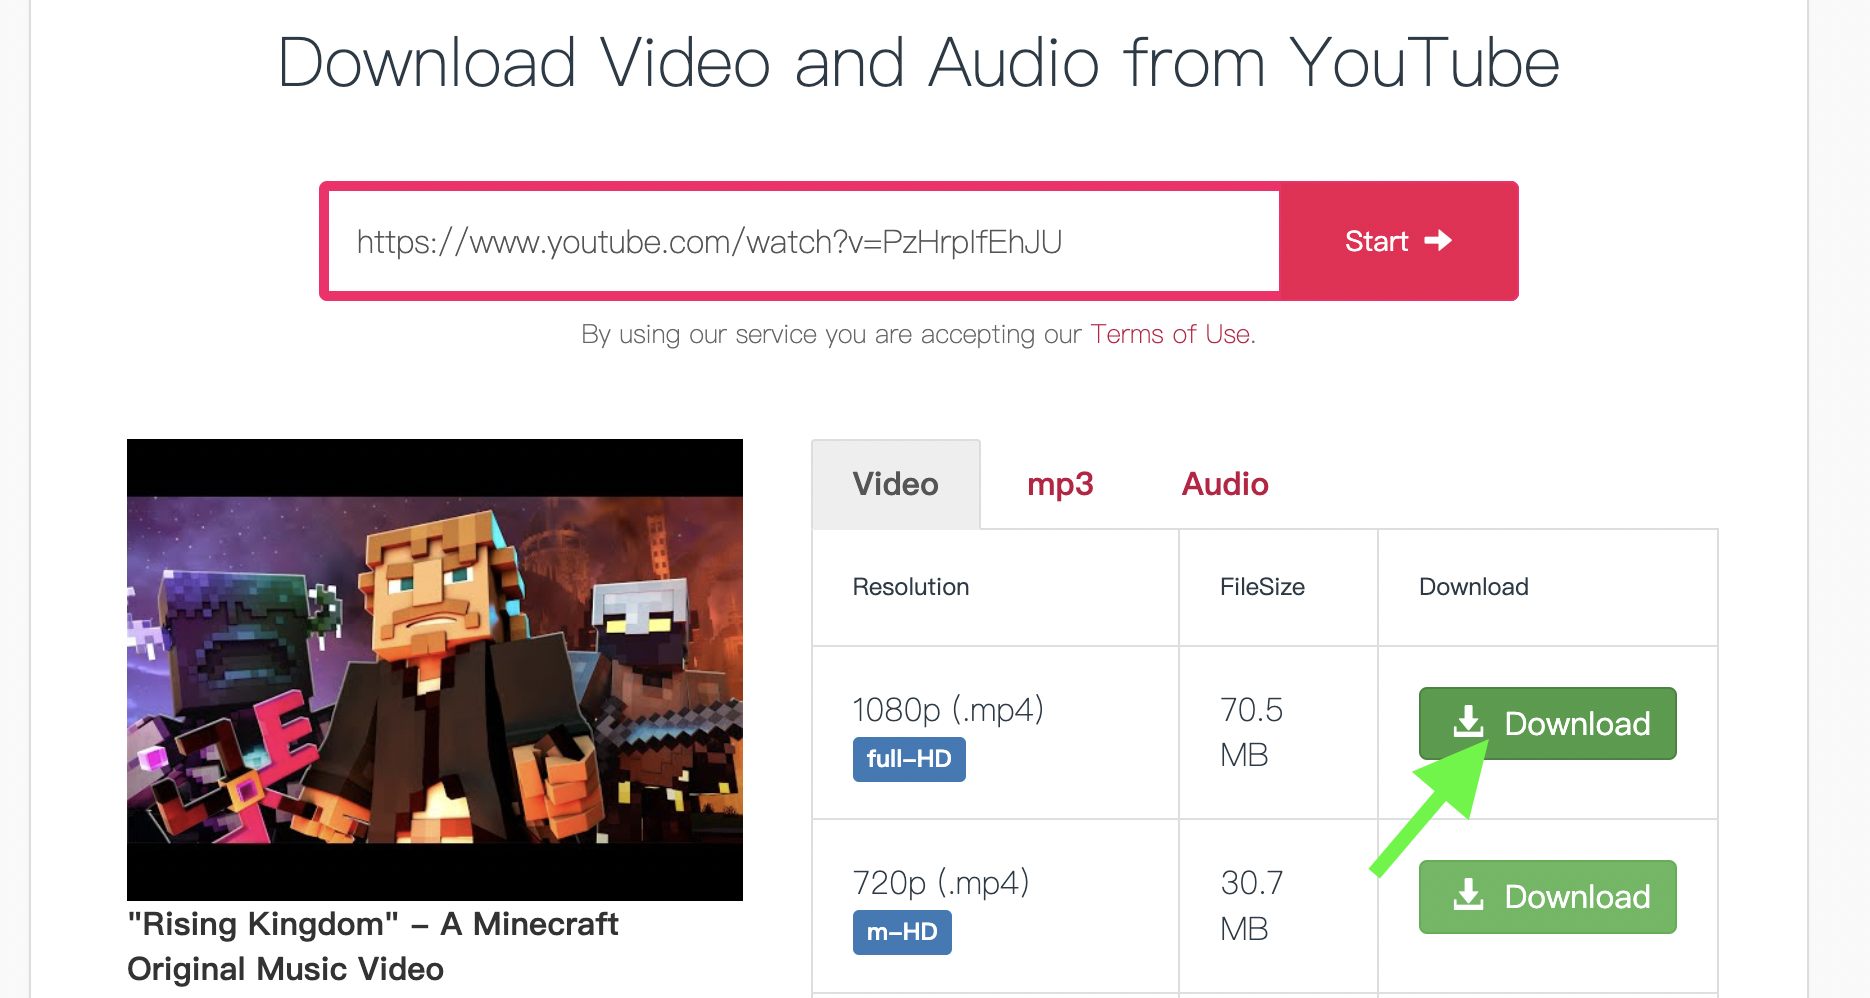 Select the video/audio format you want to download, then click "Download" button.